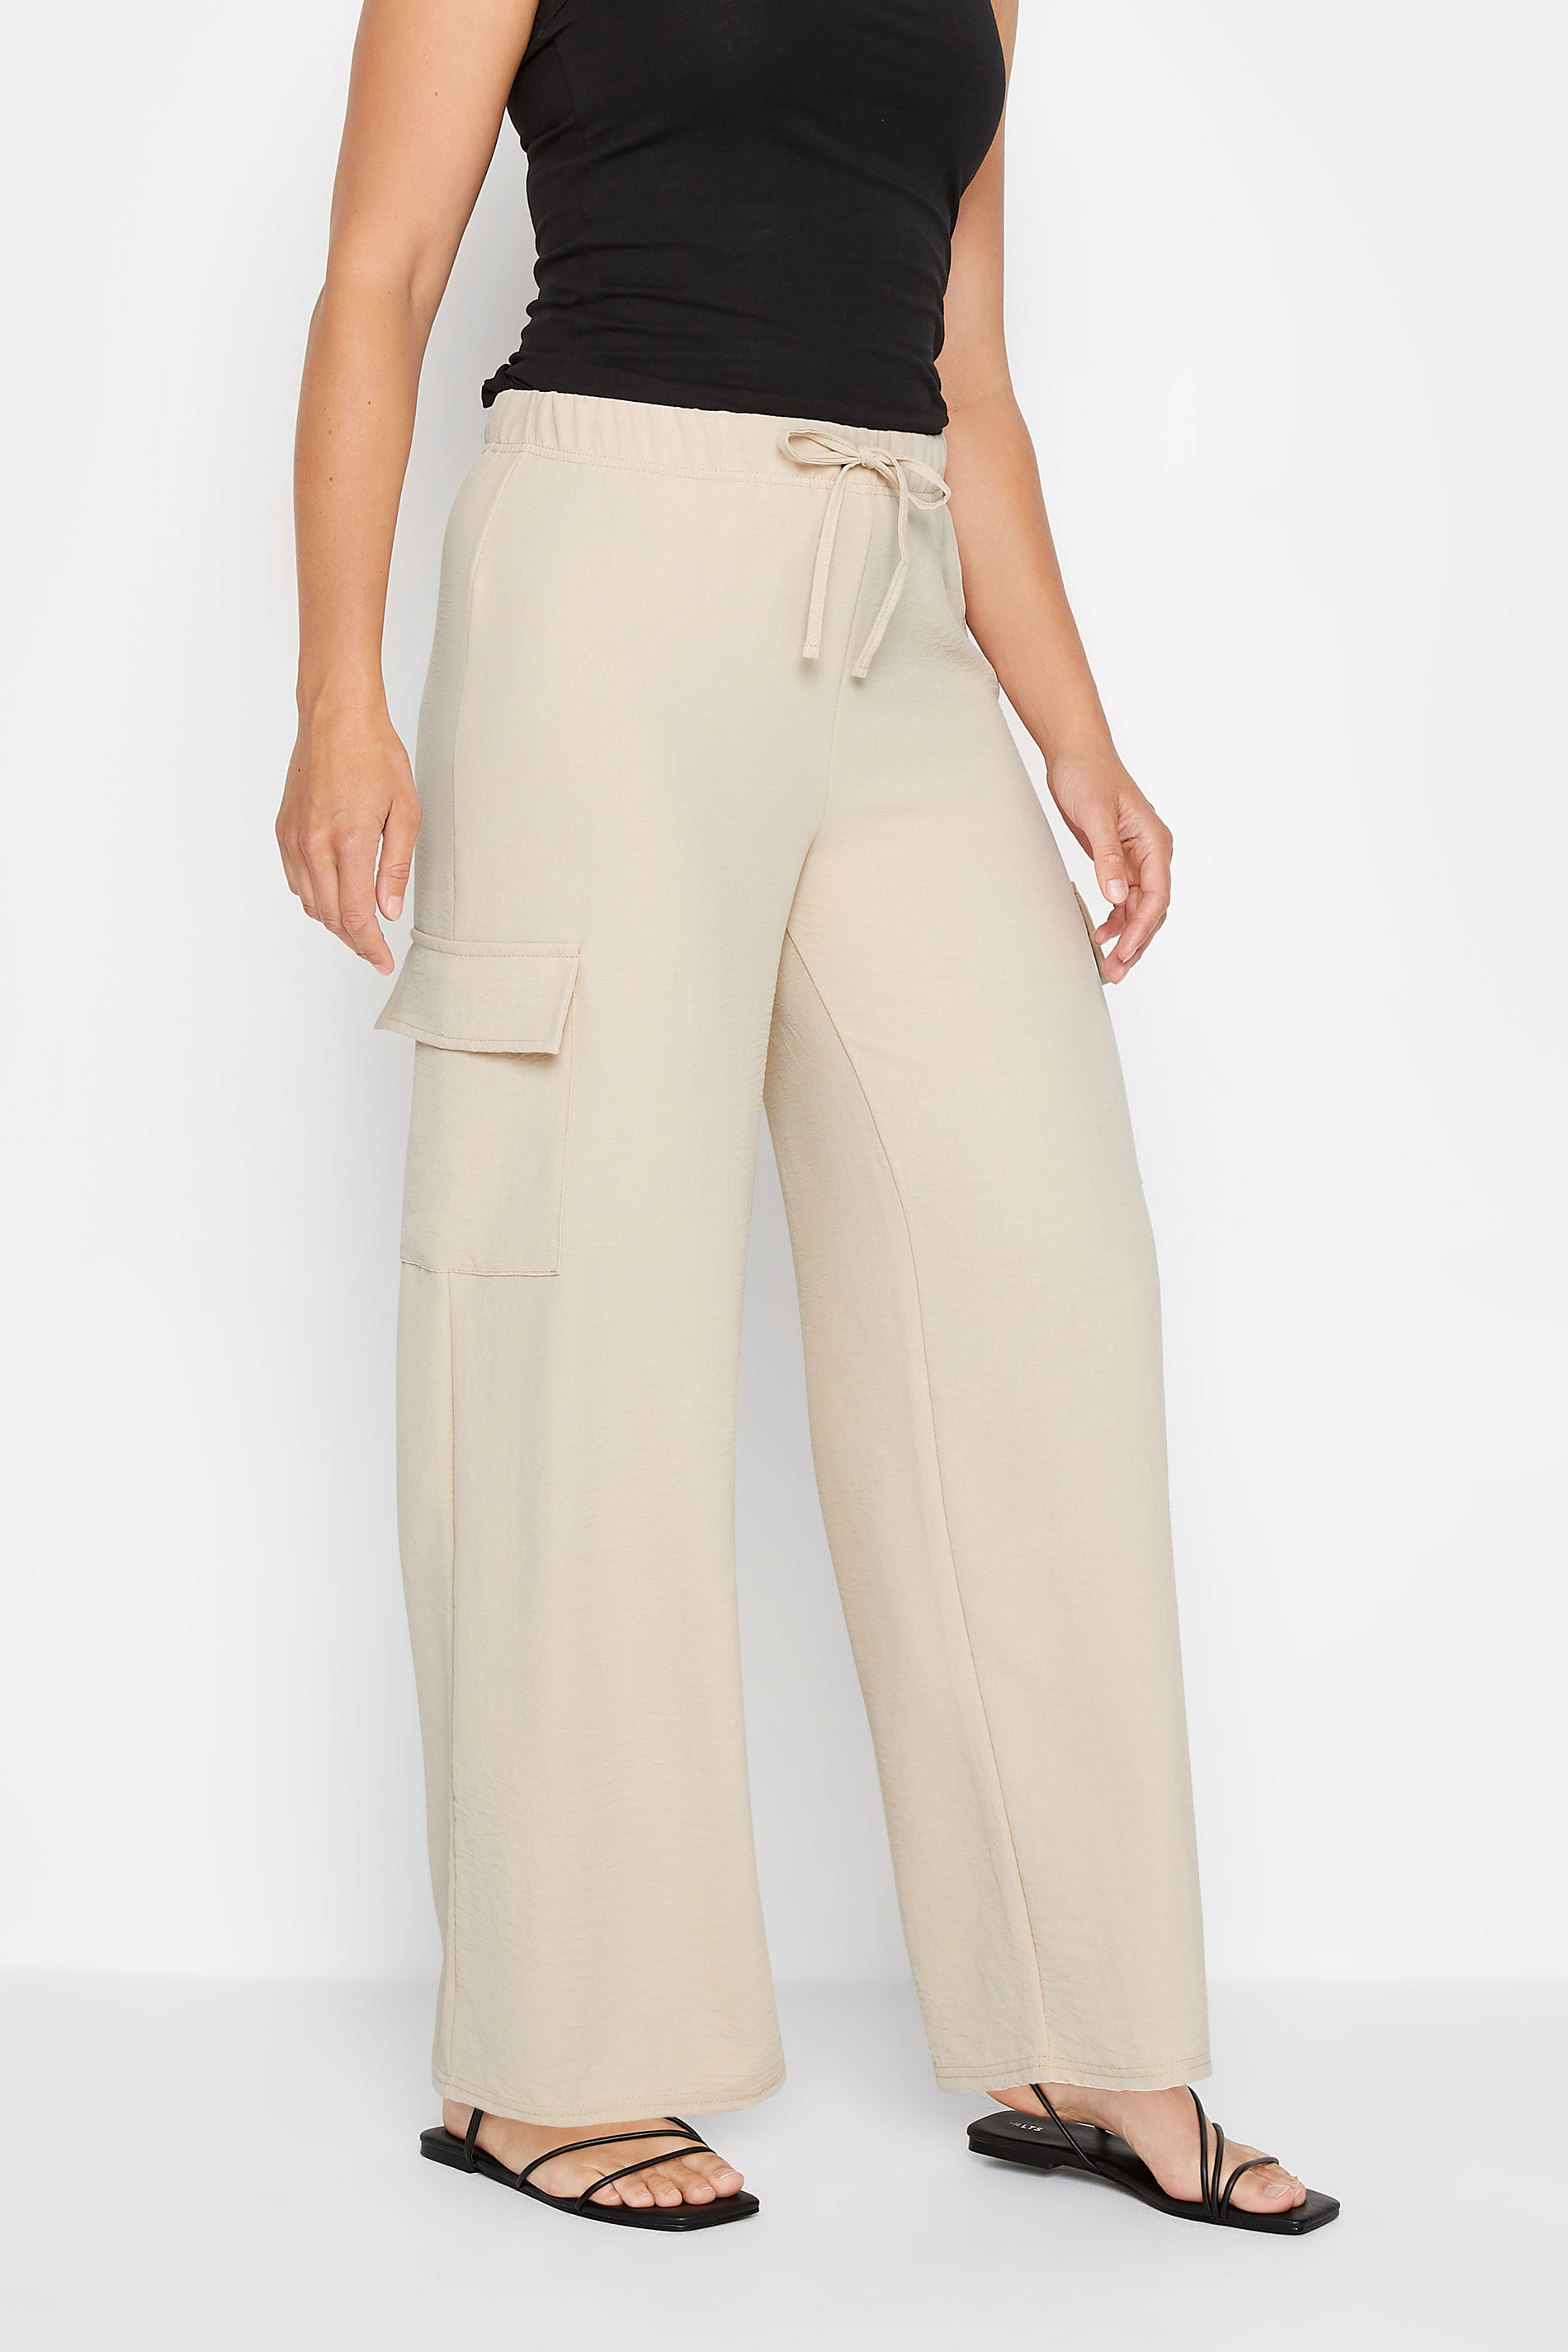 LTS Tall Women's Natural Brown Utility Trousers | Long Tall Sally 1